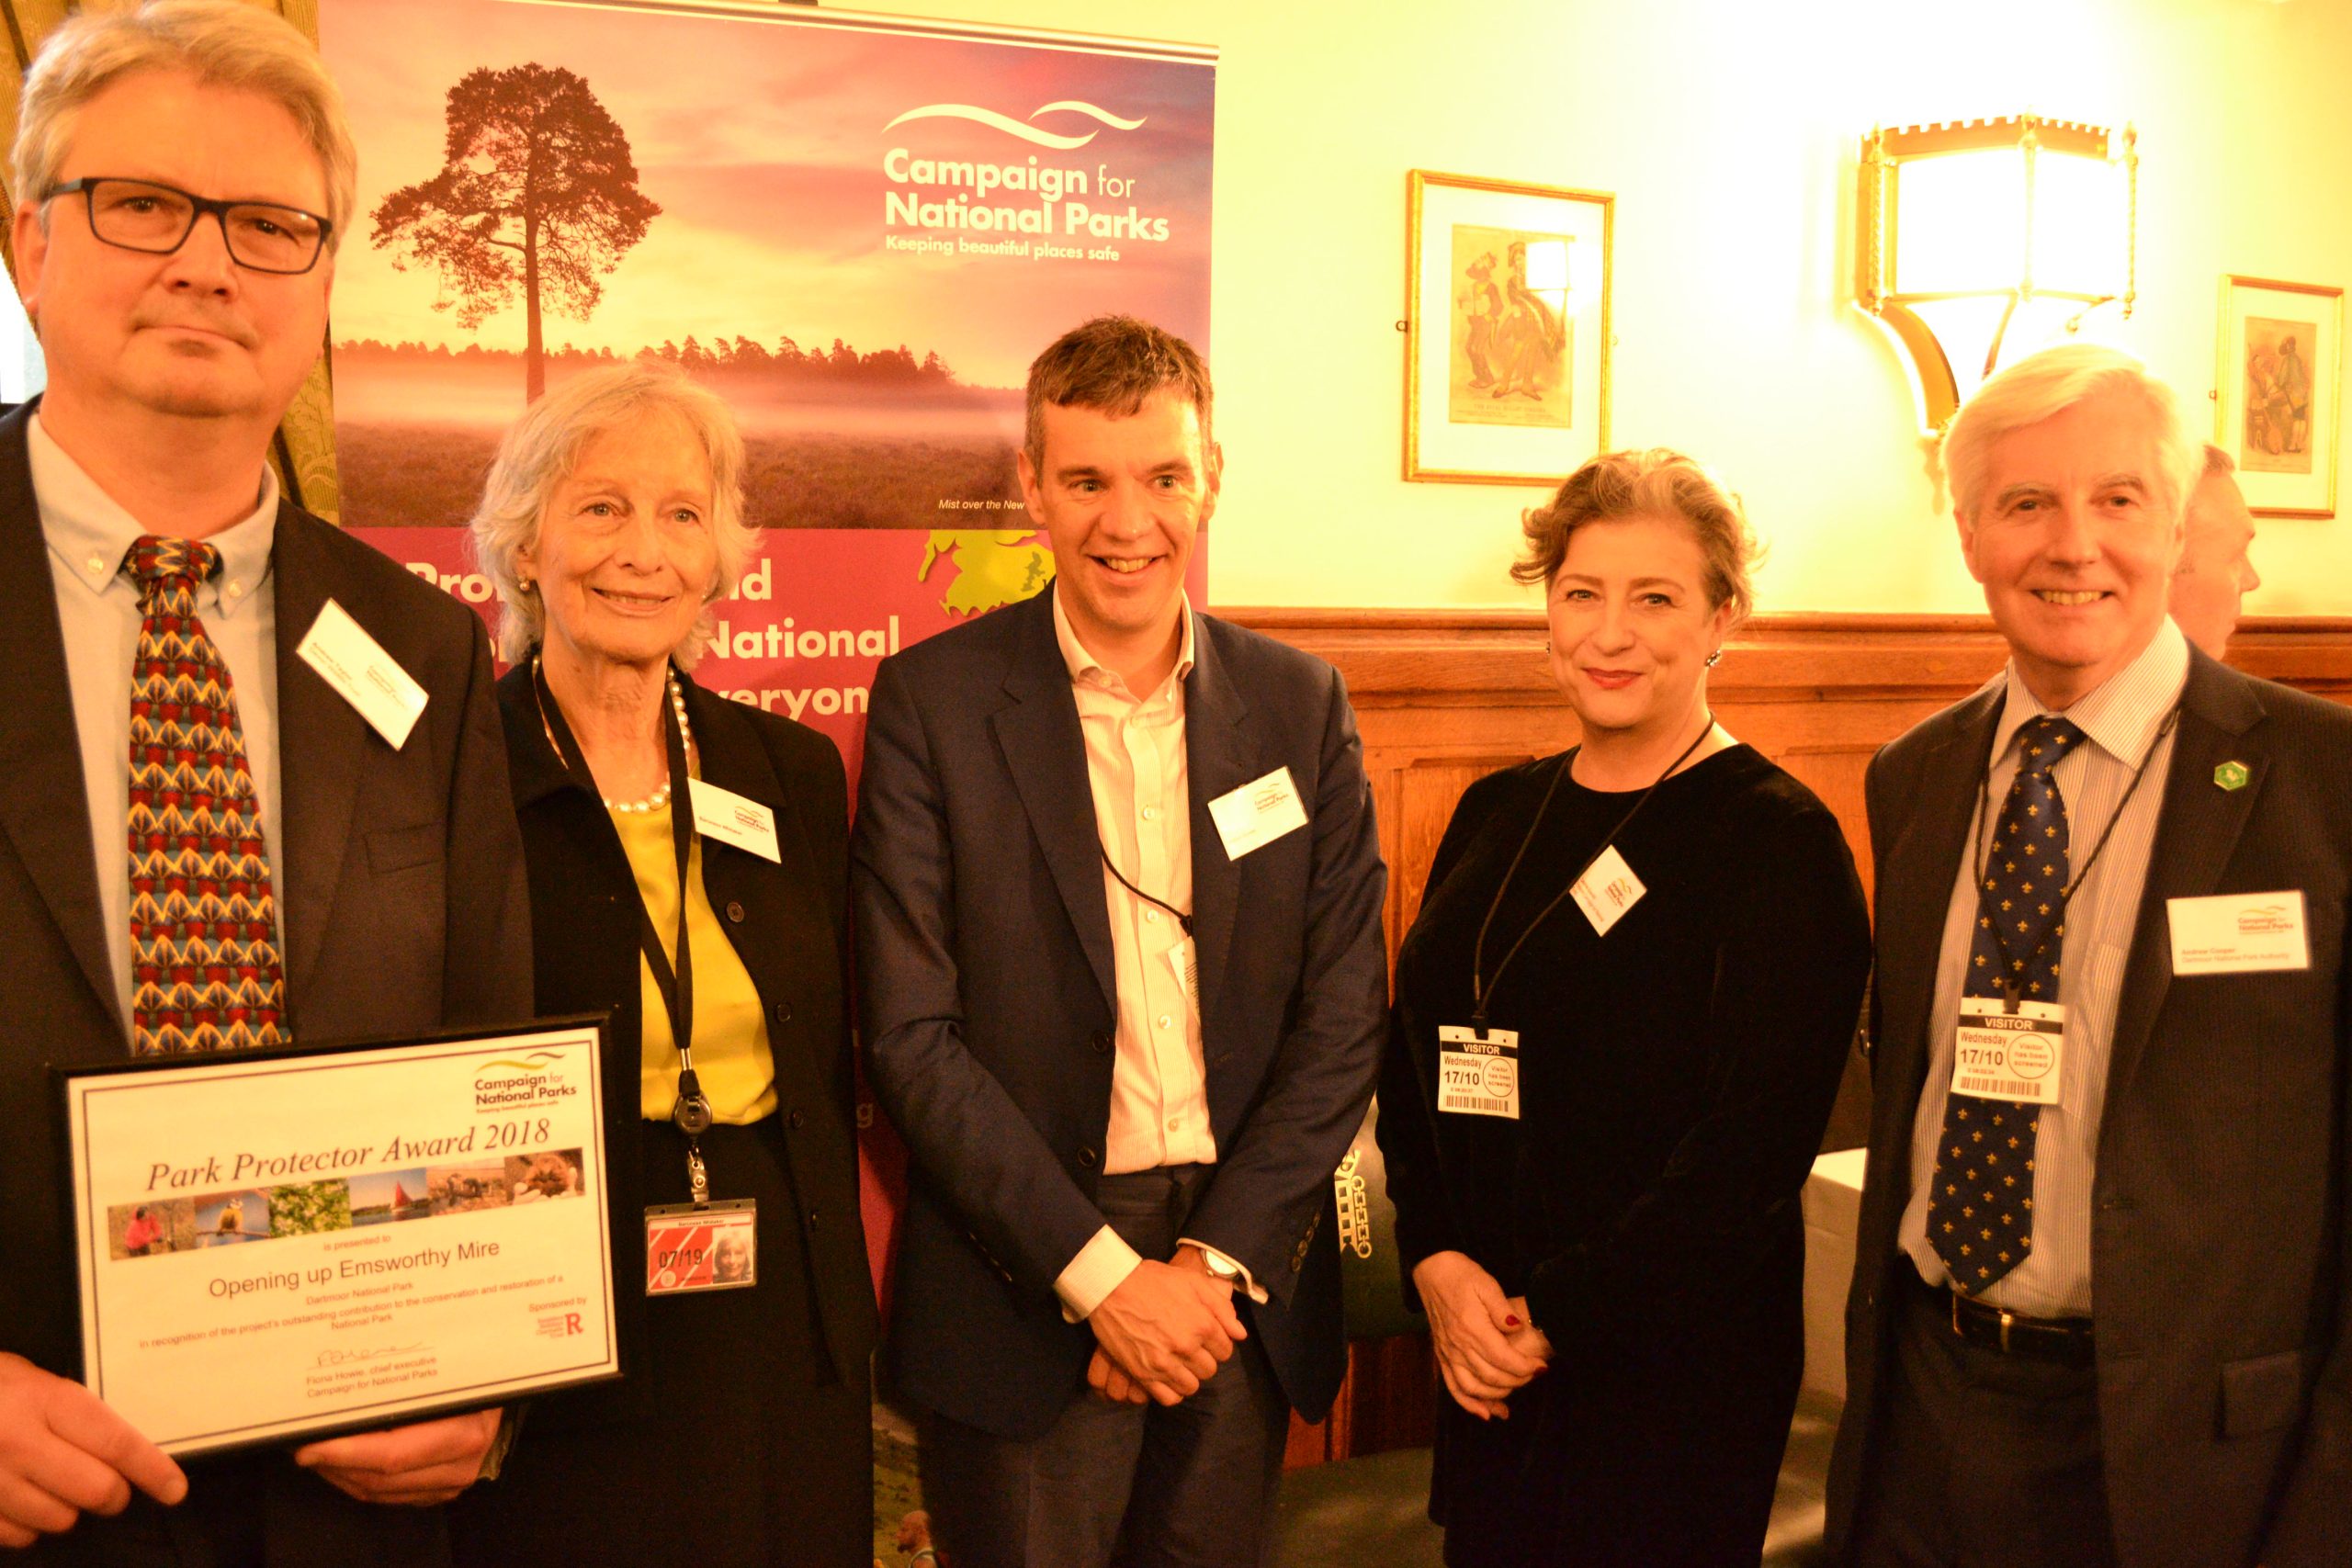 Devon wildlife trust receiving the 2018 Park Protector Award from Baroness Whitaker, Julian Glover and Caroline Quentin